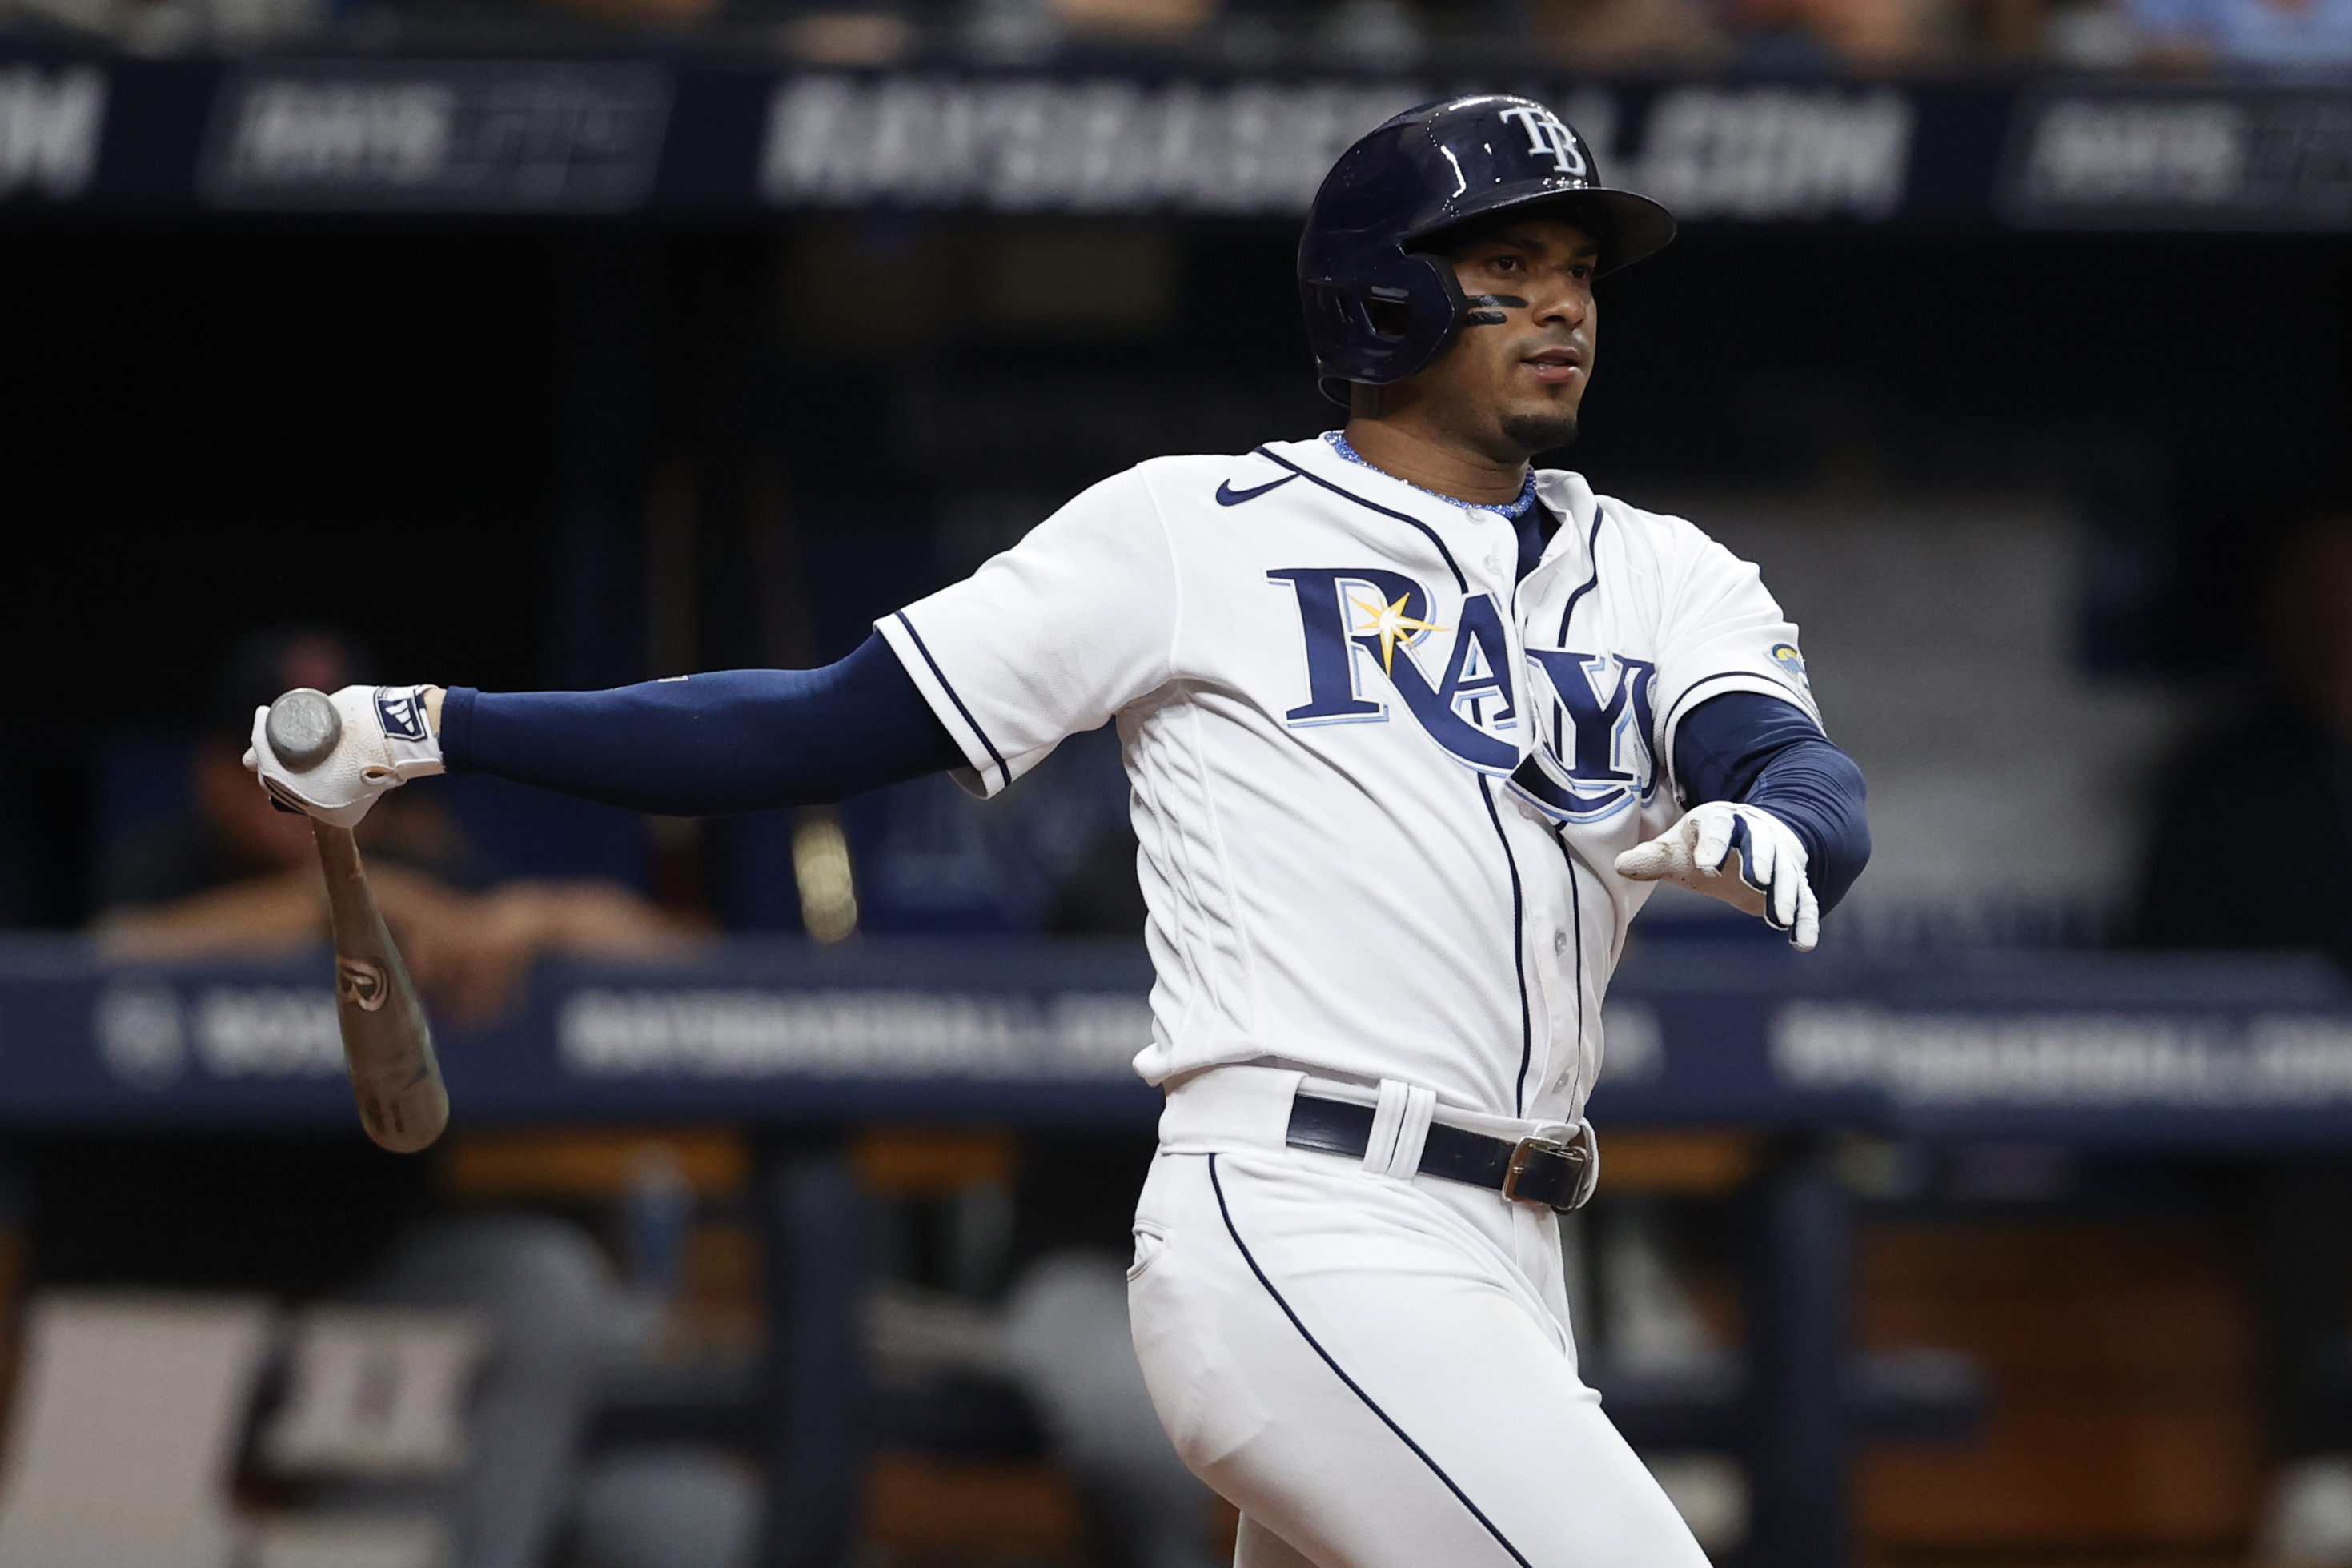 NowThis Entertainment on Instagram: Wander Franco, a superstar shortstop  for MLB's Tampa Bay Rays, will be pulled off the team and put on the  restricted list for at least a week due